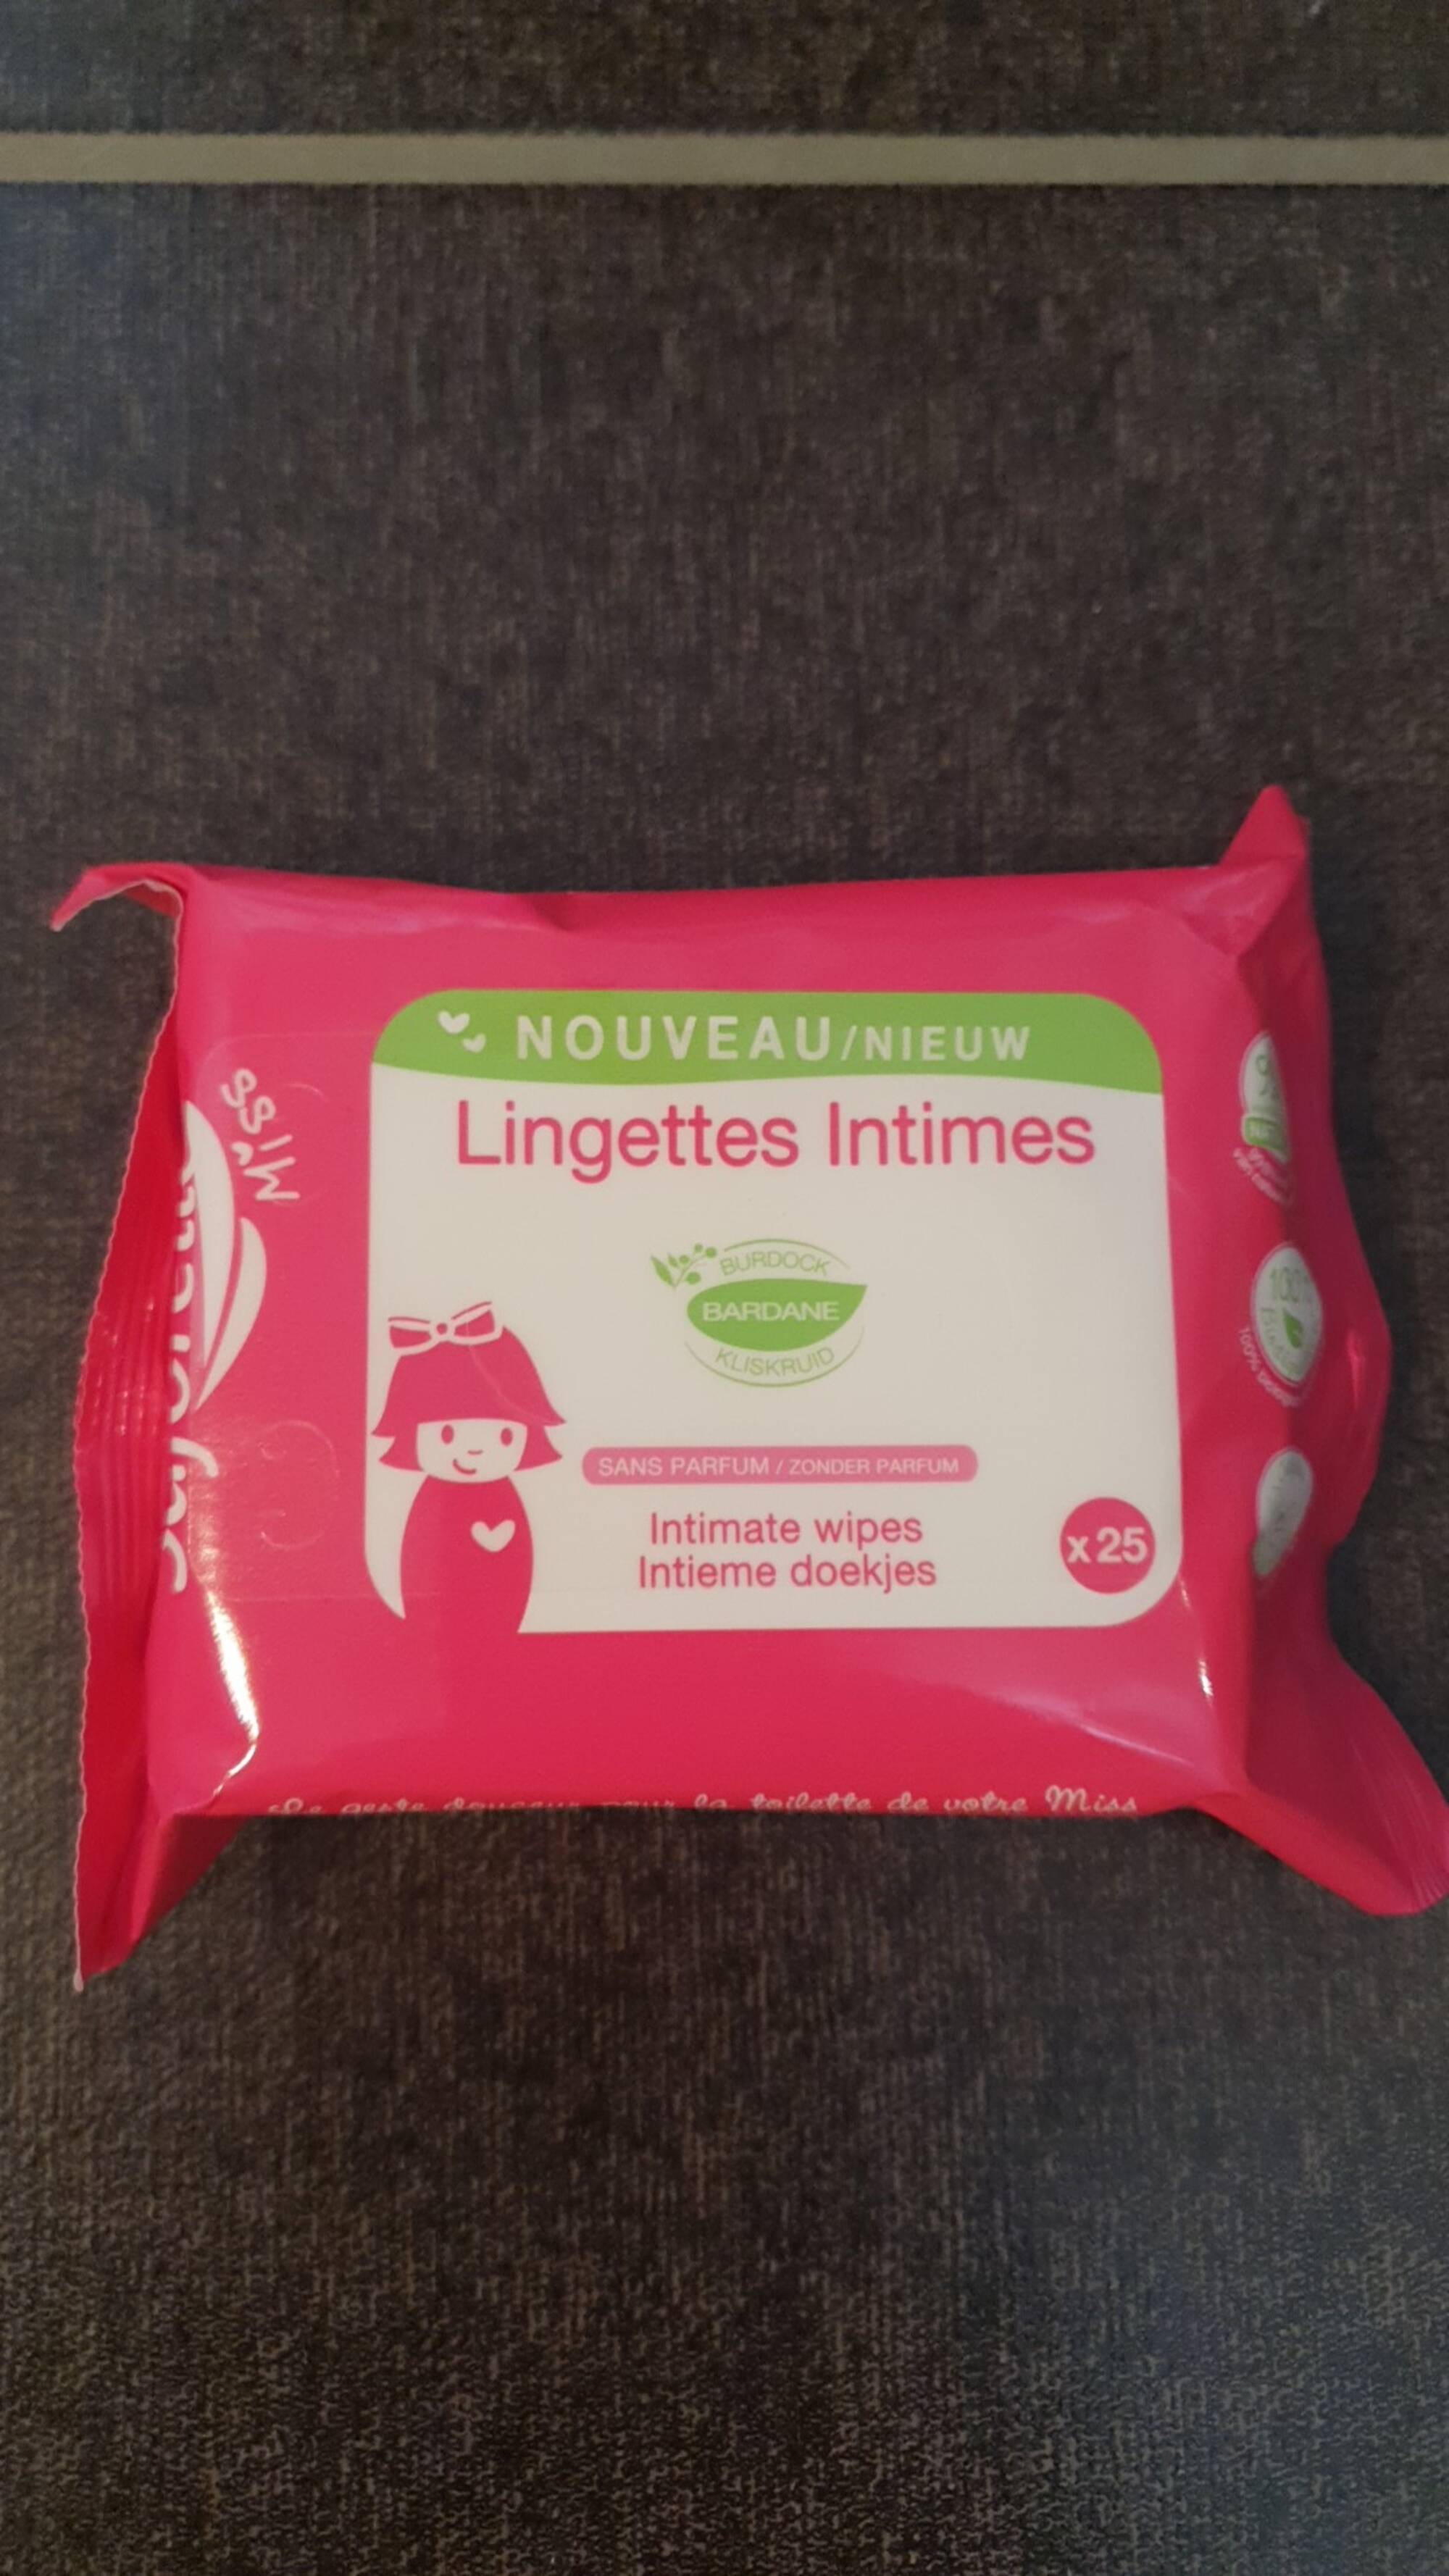 LINGETTES INTIMES ABRICOT FEMME